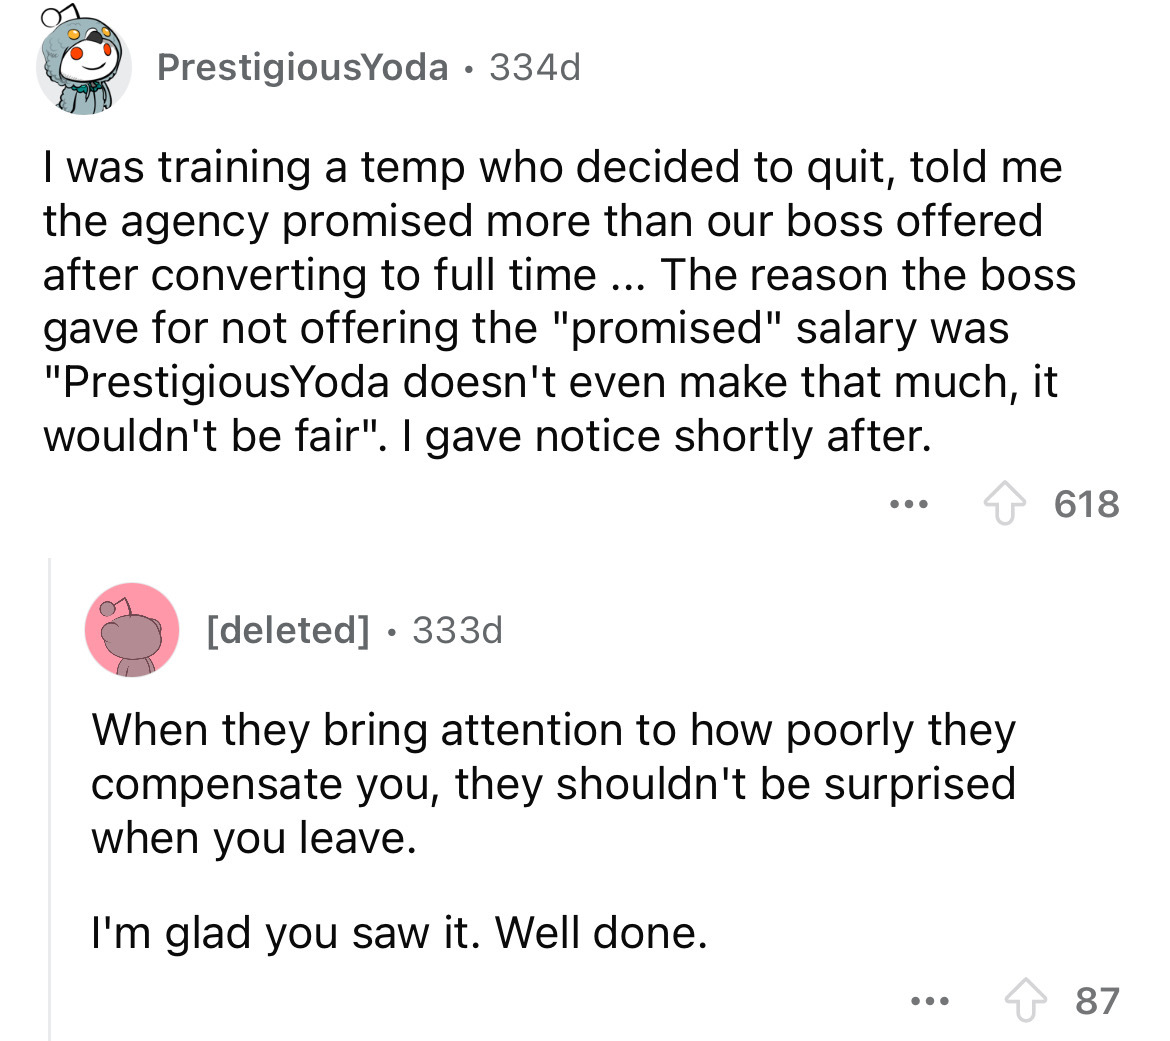 screenshot - PrestigiousYoda 334d . I was training a temp who decided to quit, told me the agency promised more than our boss offered after converting to full time ... The reason the boss gave for not offering the "promised" salary was "PrestigiousYoda do